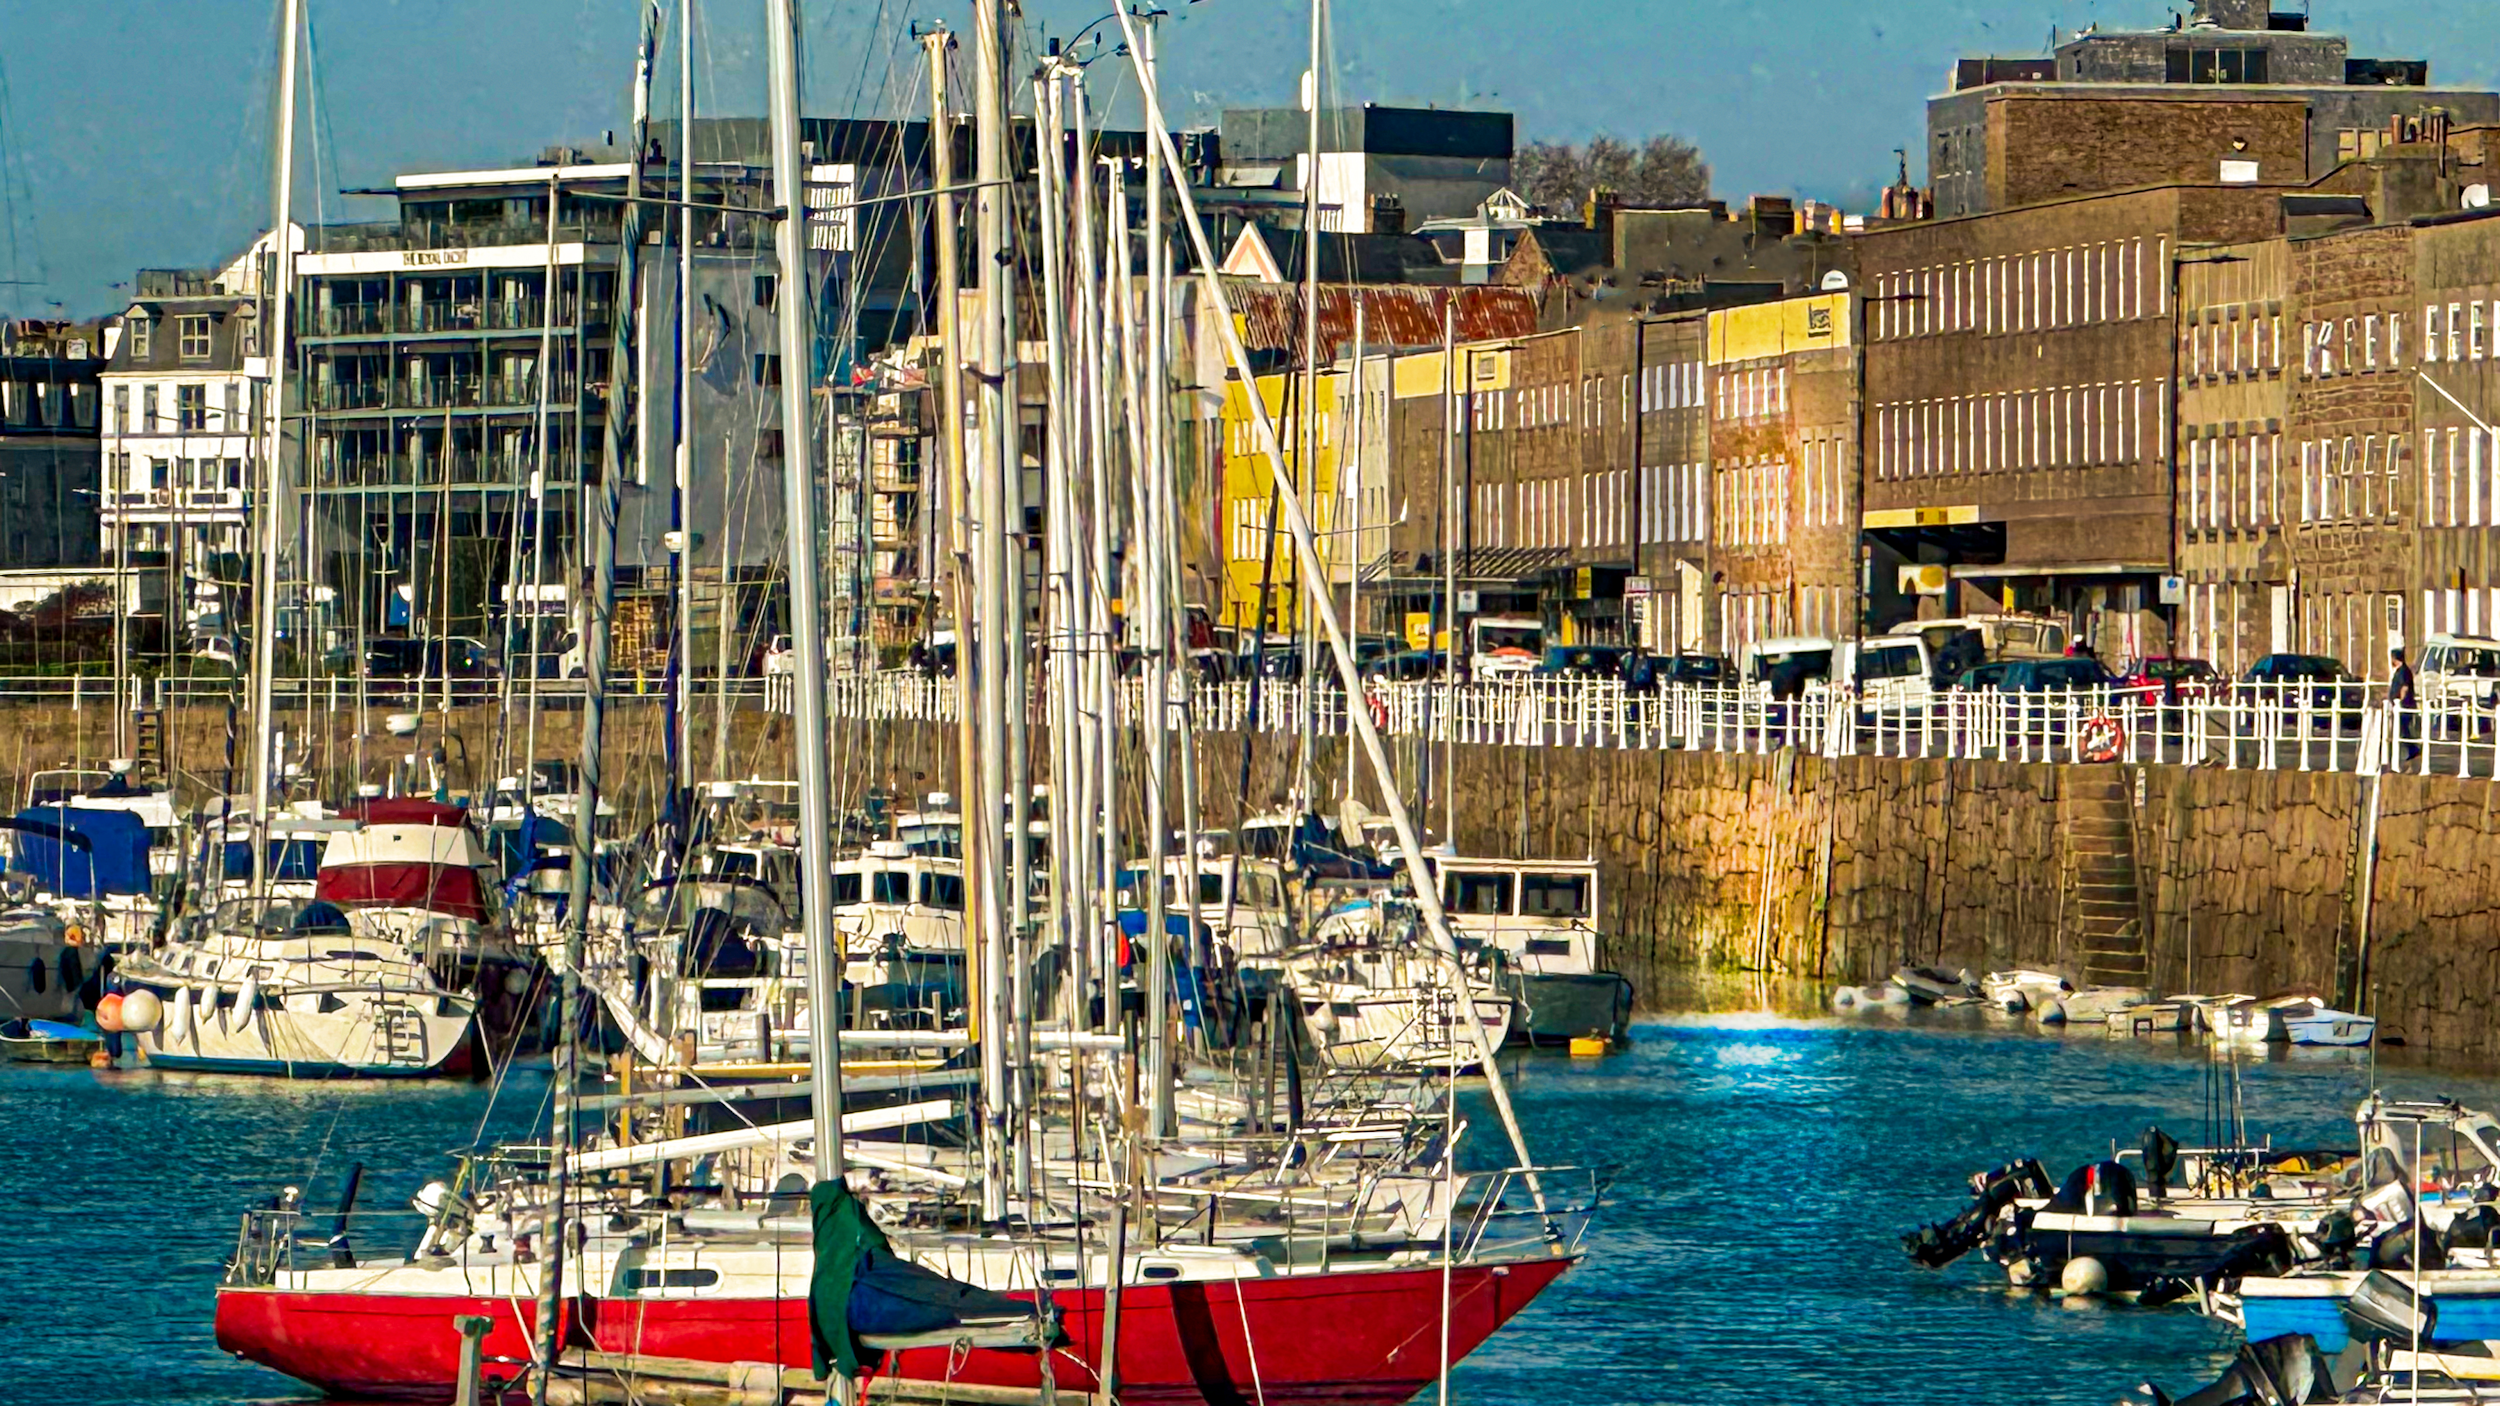 The Harbour Gallery St Helier